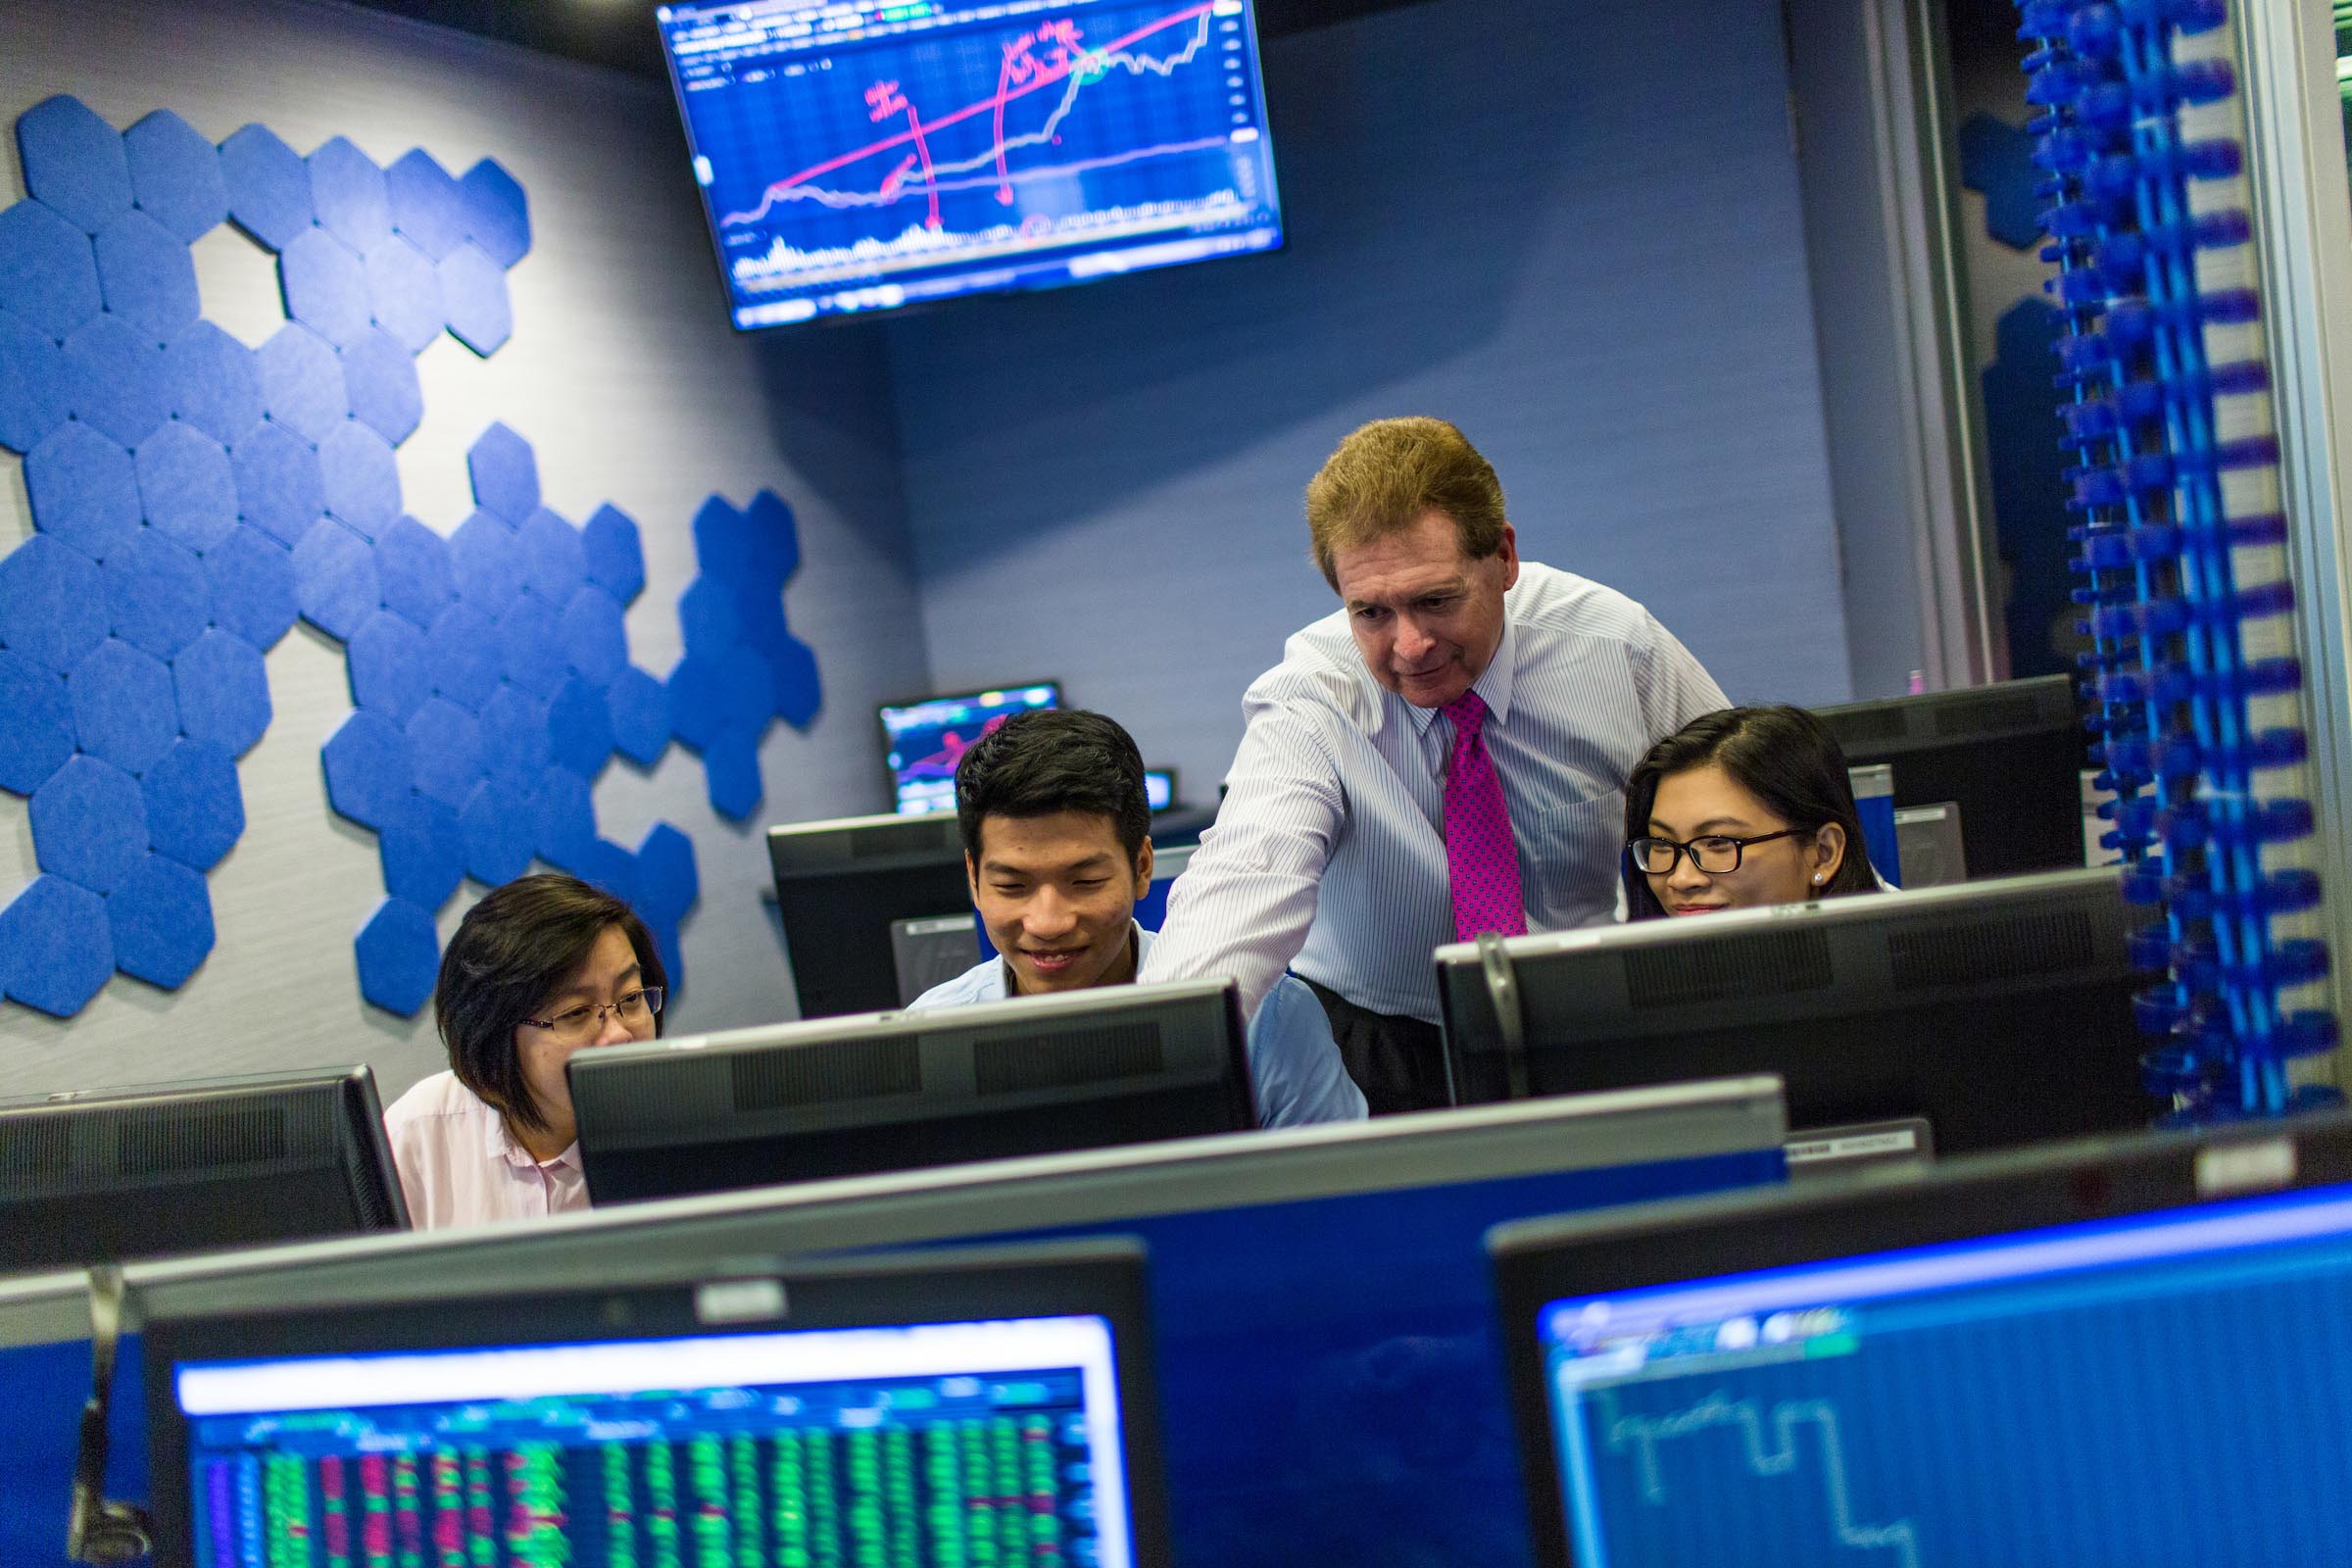 RMIT students are working in the Financial Trading Lab which replicates a real-world financial stock trading room. RMIT Vietnam has been shortlisted for a Teaching and Learning Strategy of the Year award for its authentic assessment strategy.